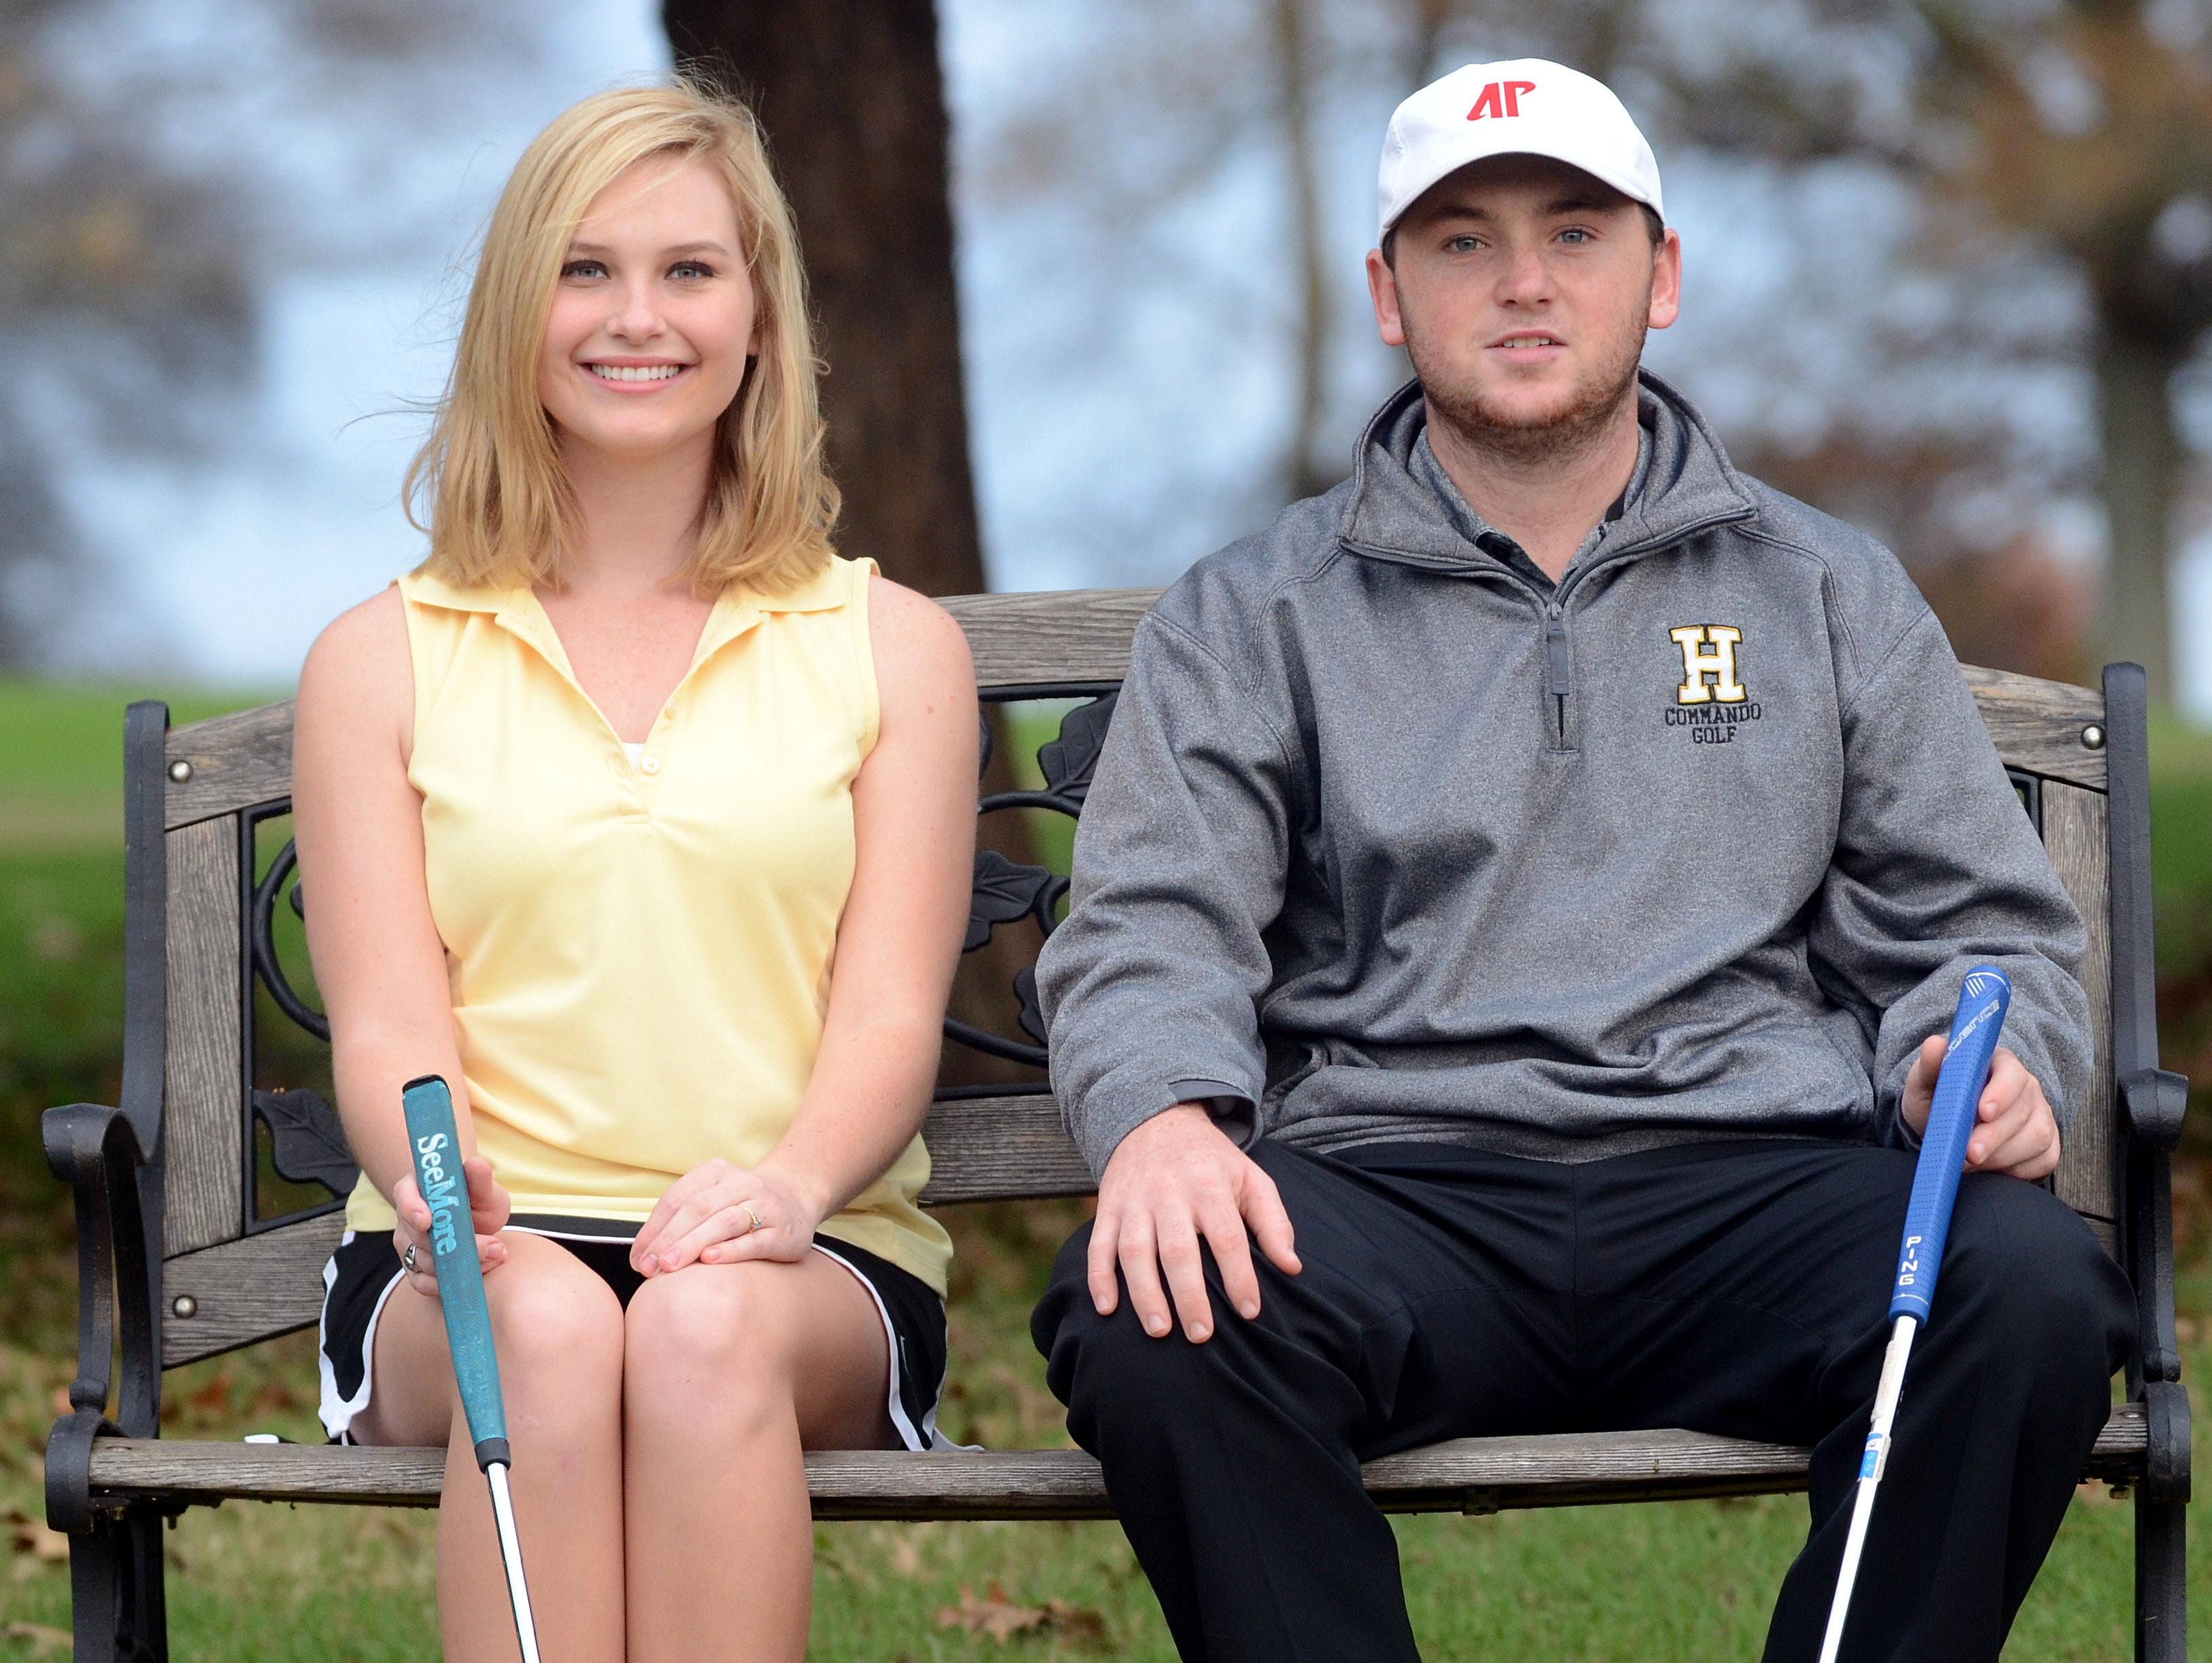 Hendersonville High senior golfers Meghann Stamps and Austin Lancaster have each signed a letter-of-intent to continue their playing career at Austin Peay State University.